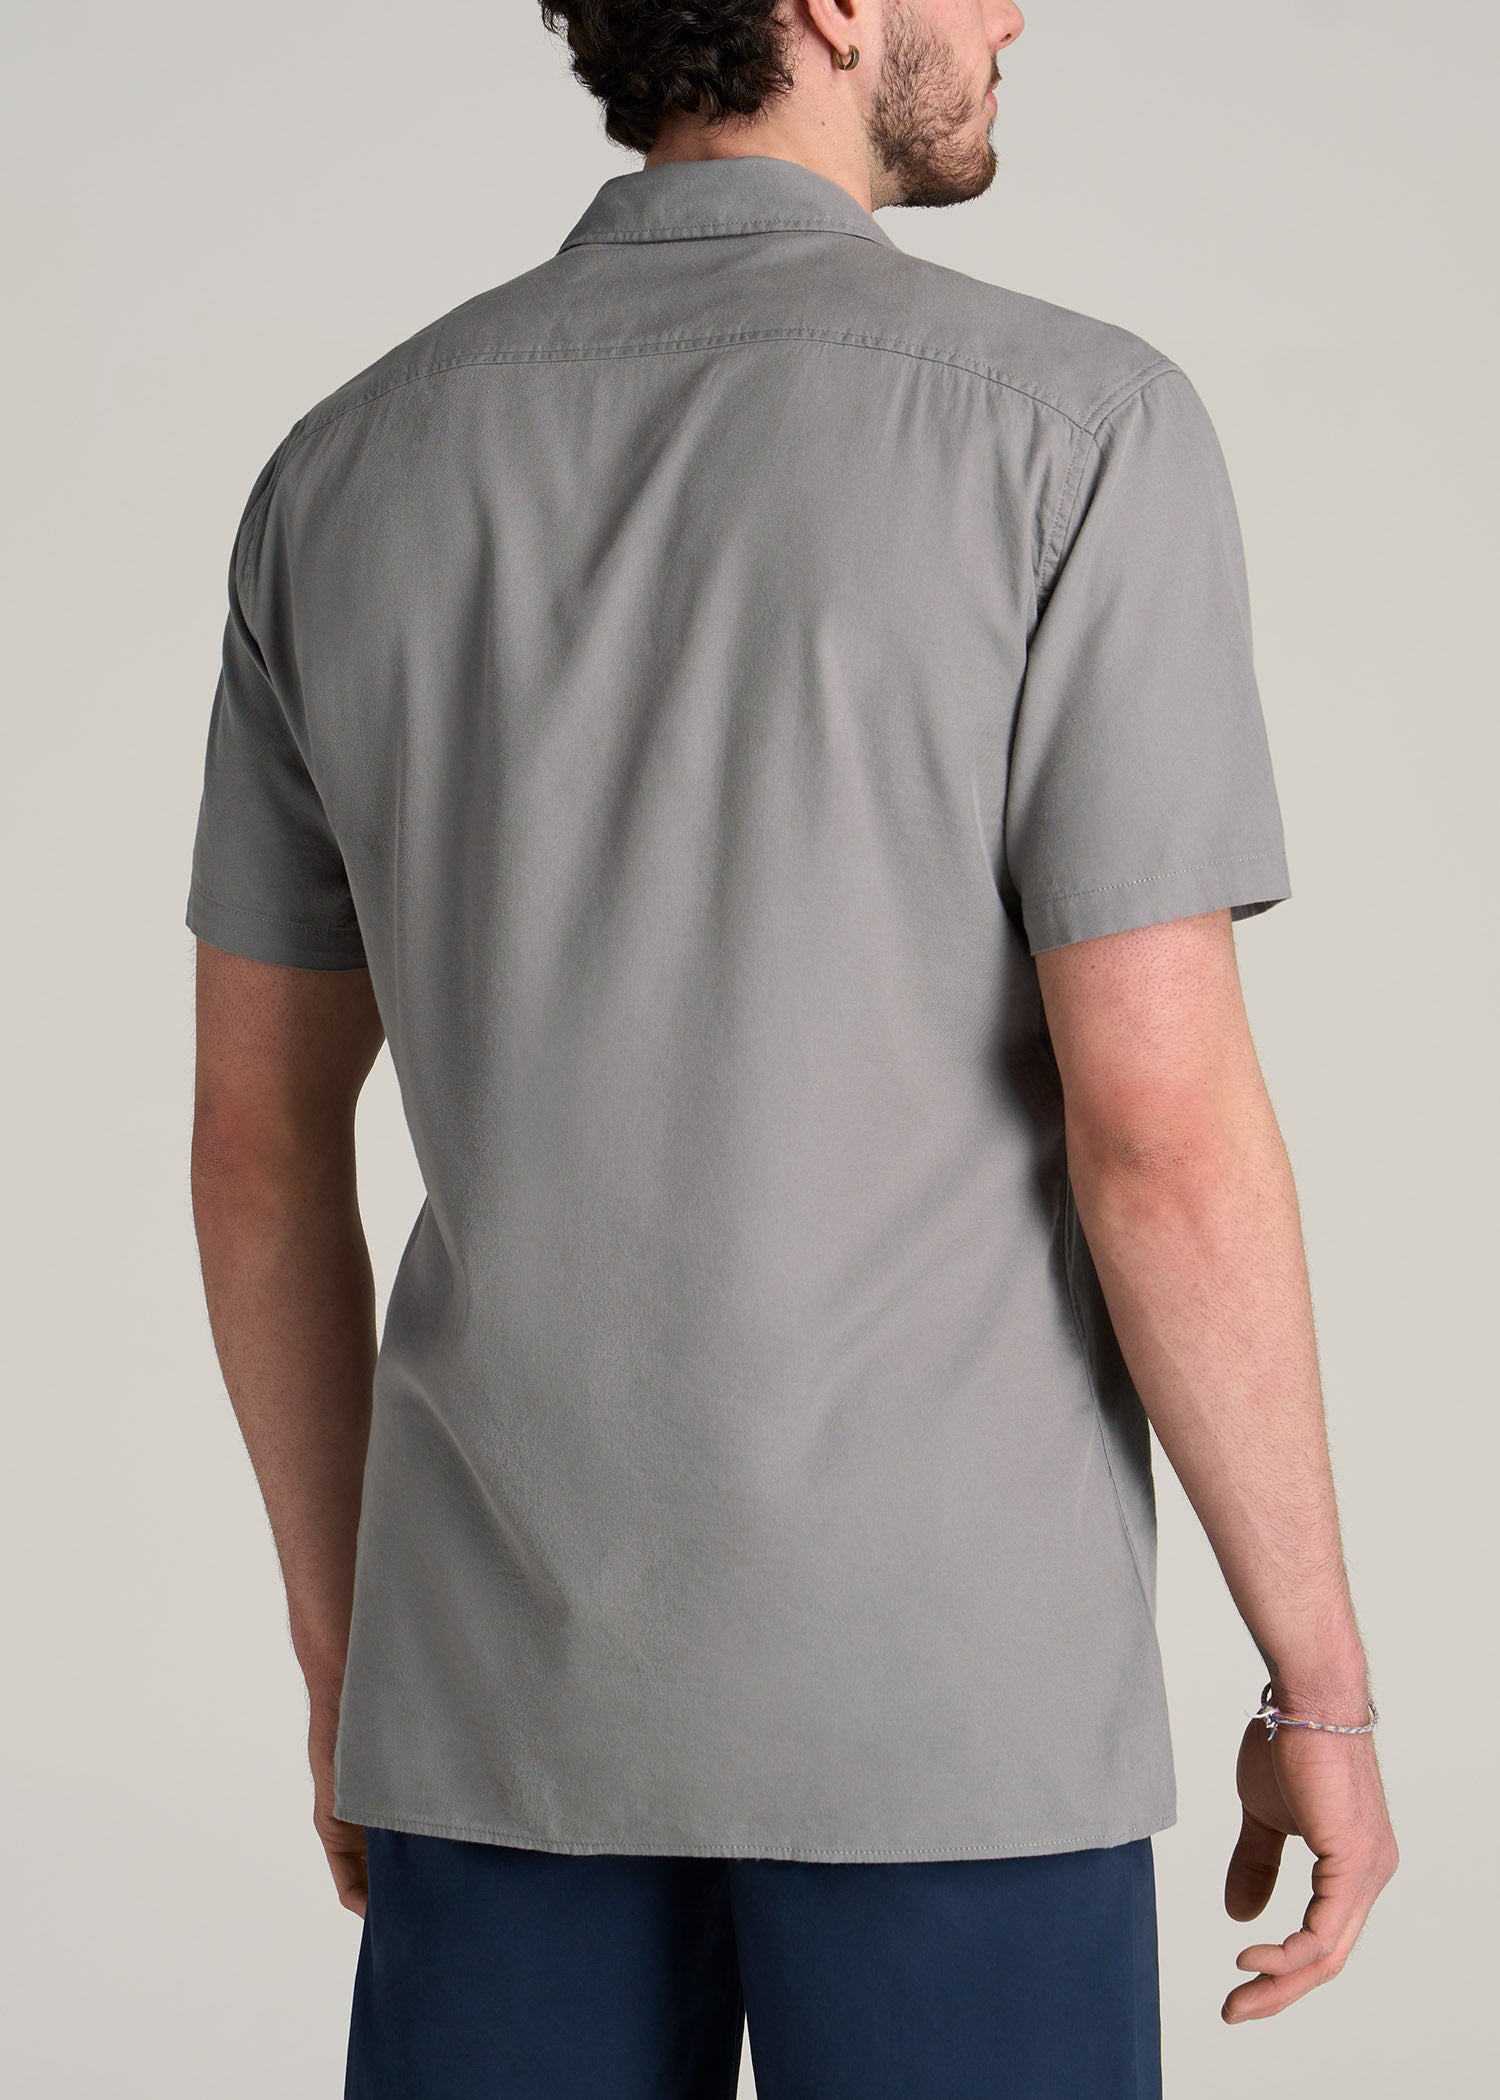 LJ&S Two-Pocket Camp Shirt for Tall Men in Pewter S / Tall / Pewter